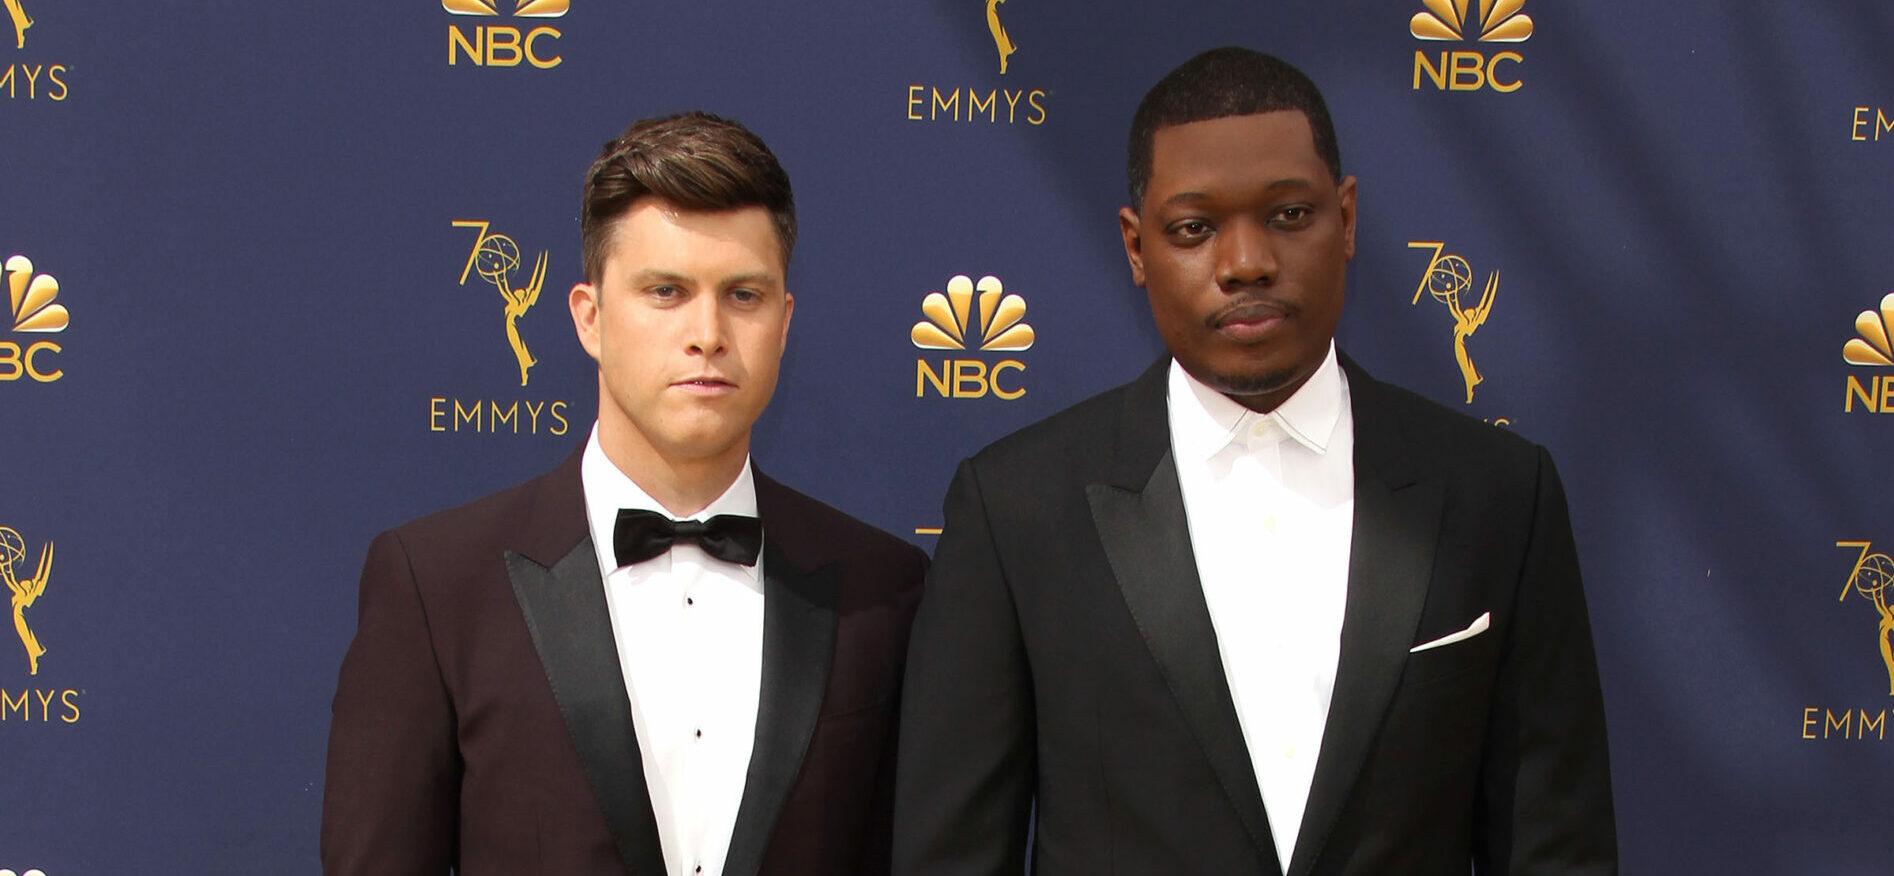 Colin Jost & Michael Che at the Emmys